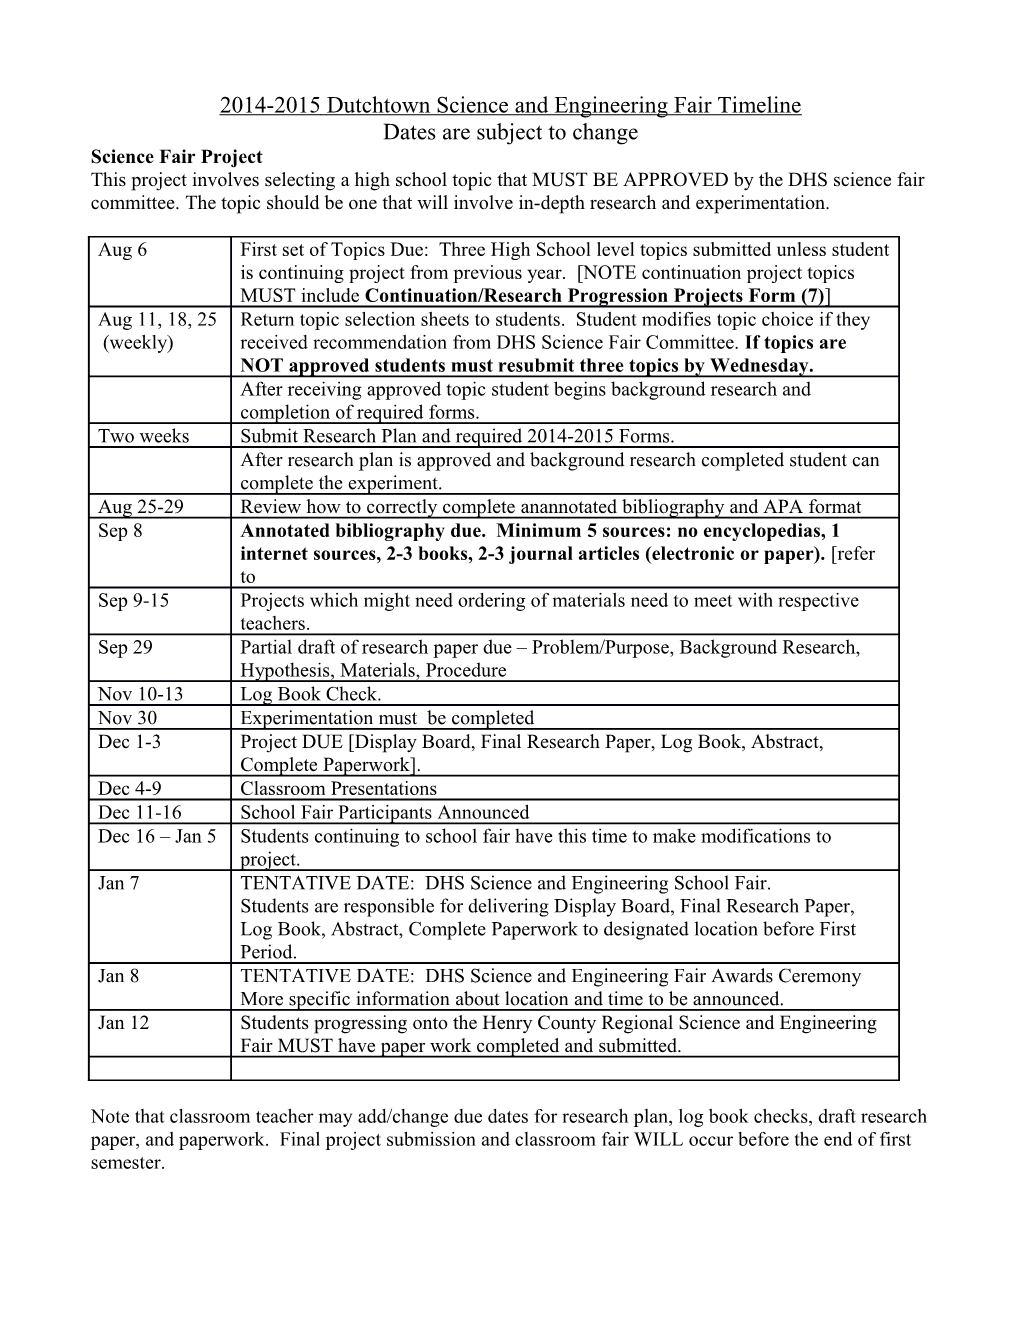 2014-2015Dutchtown Science and Engineering Fair Timeline